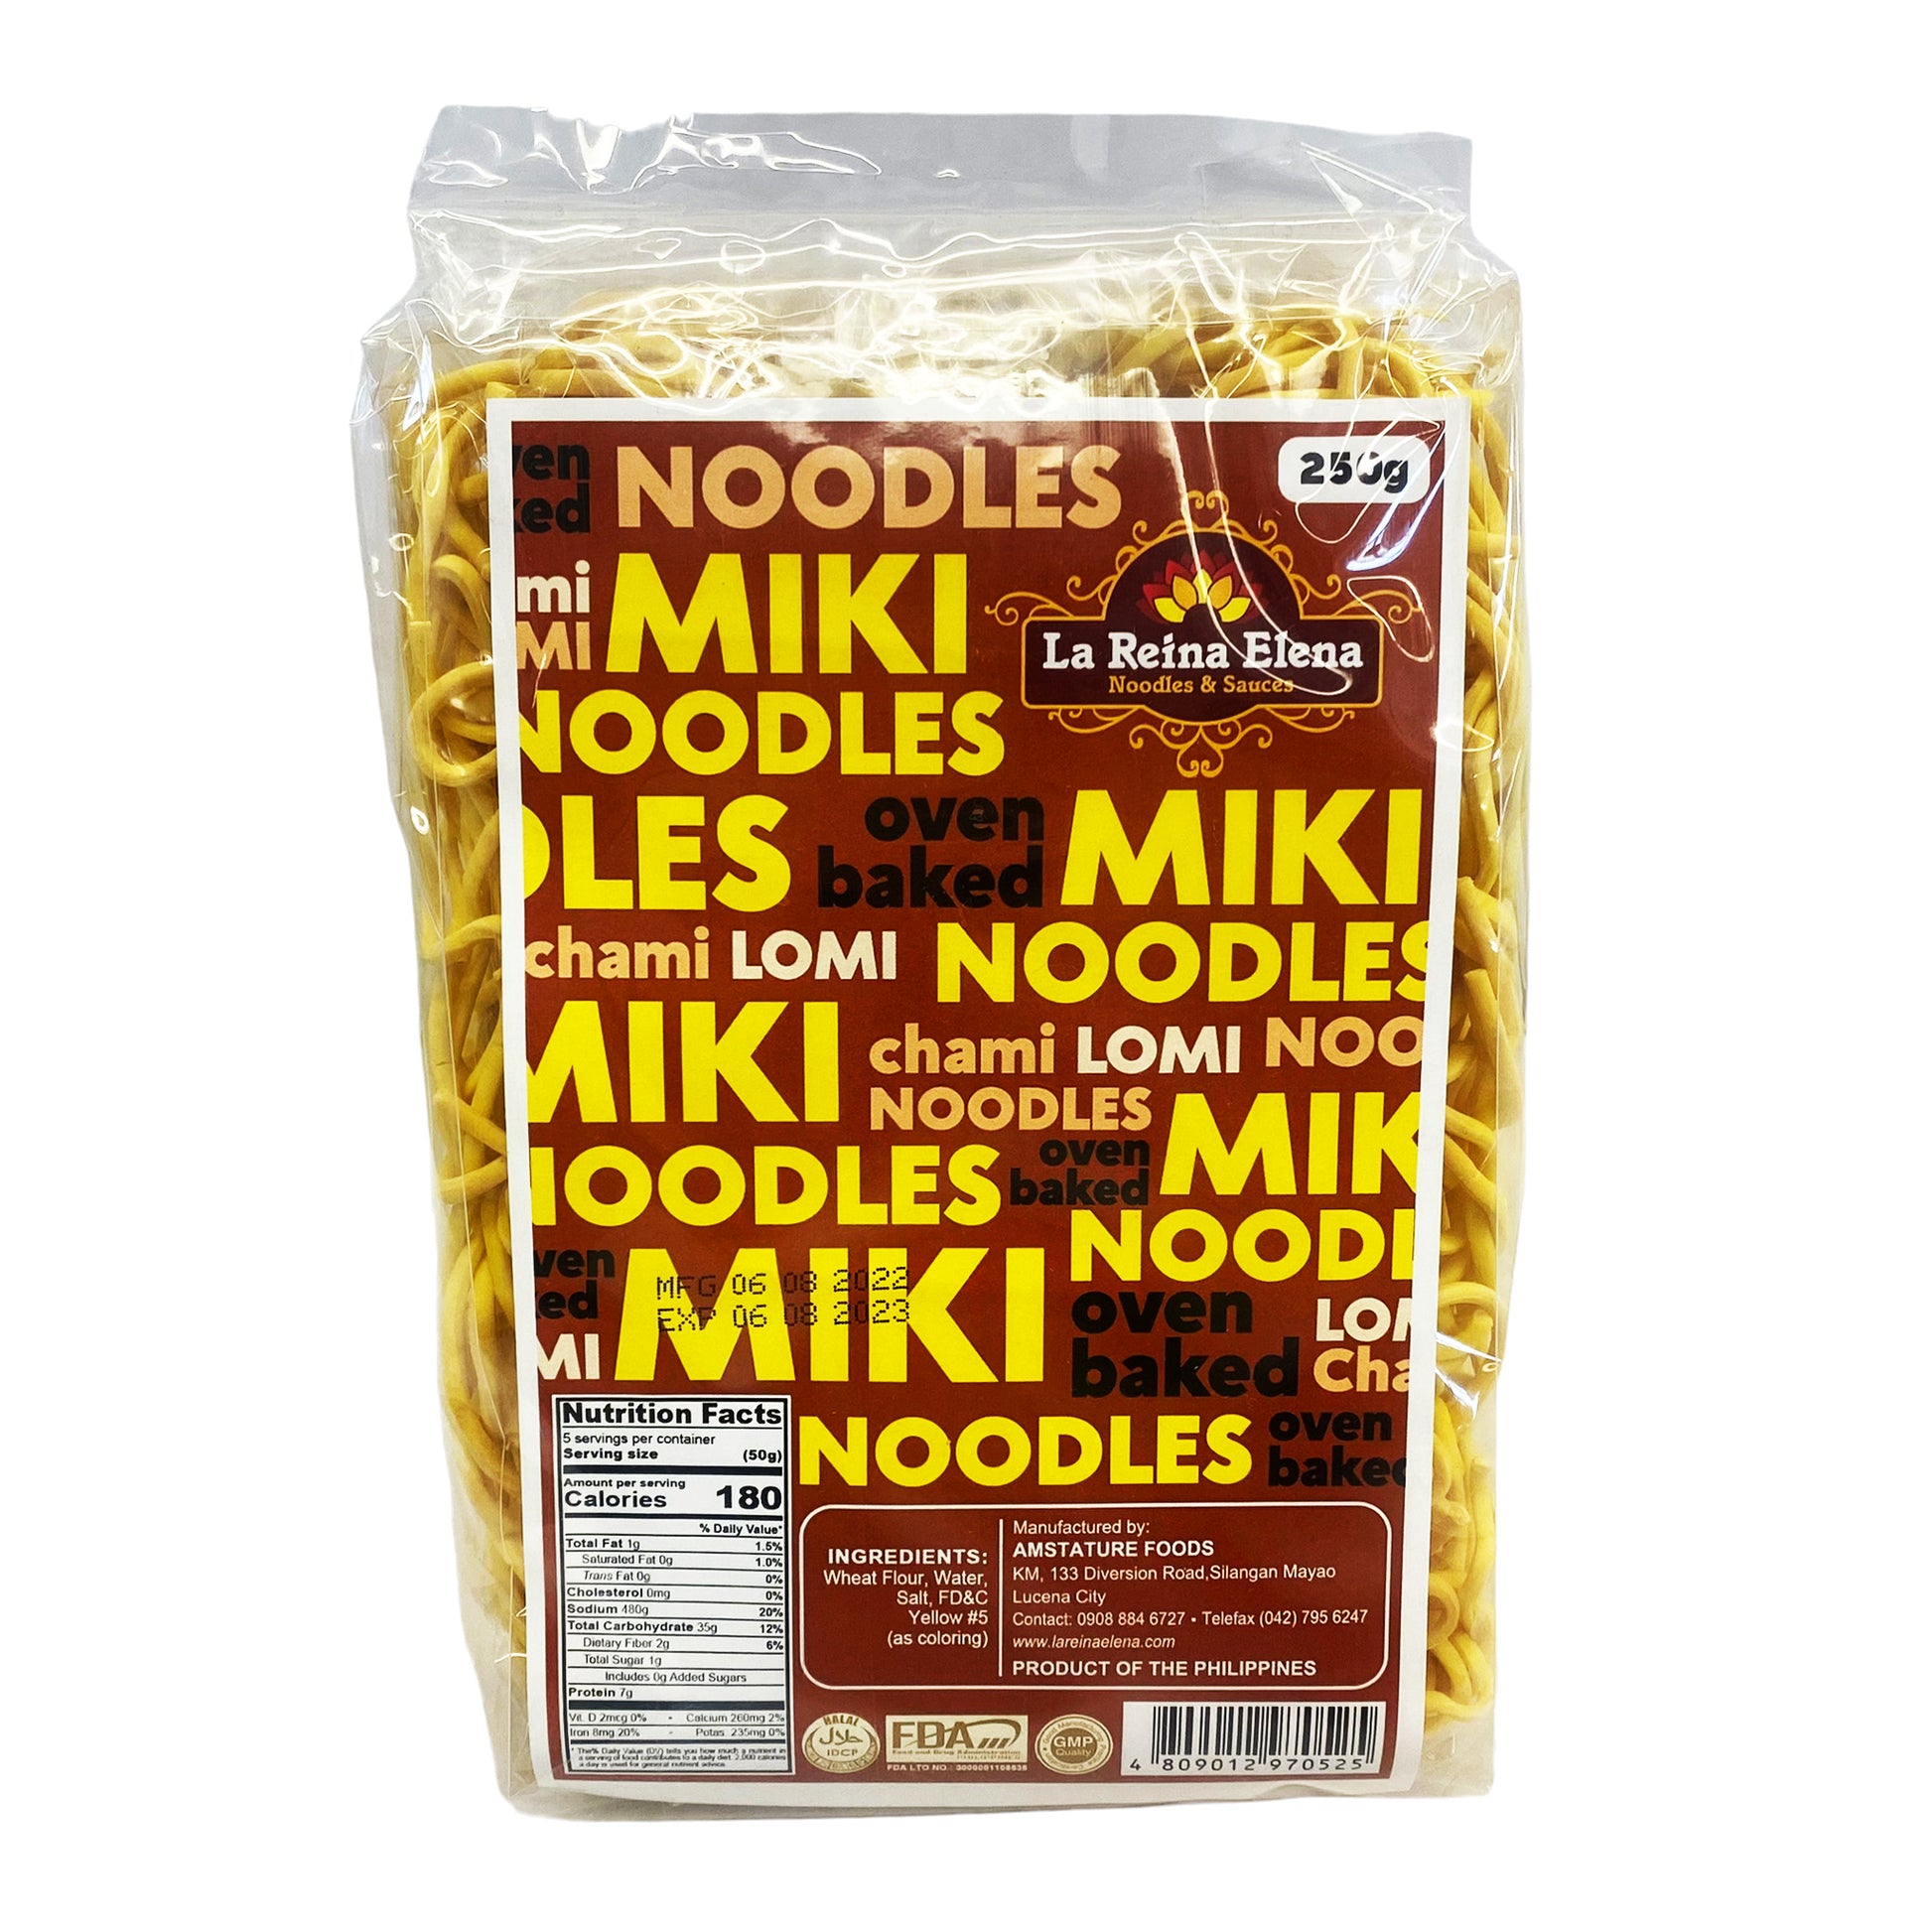 Front graphic view of La Reina Elena Oven Baked Miki Noodle 8.8oz (250g)